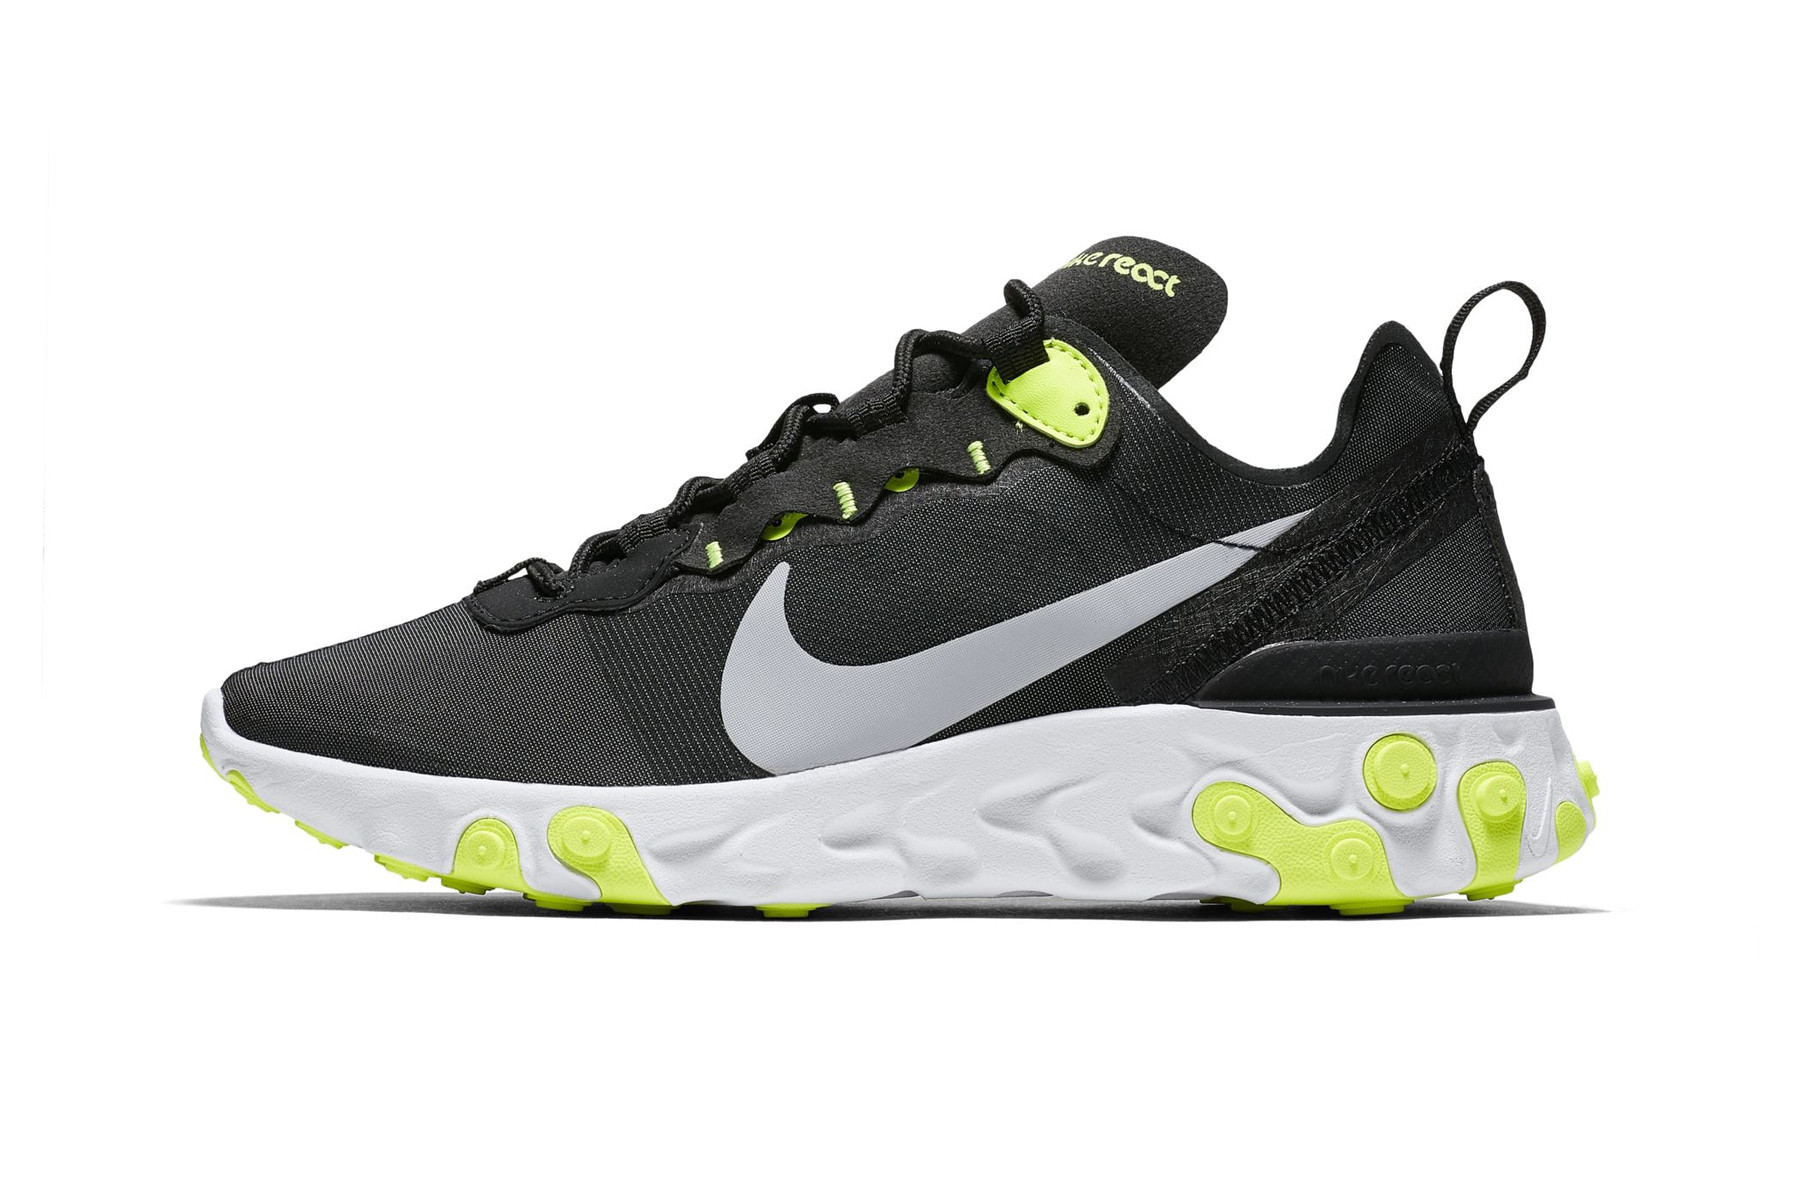 nike react element 55 grey and green